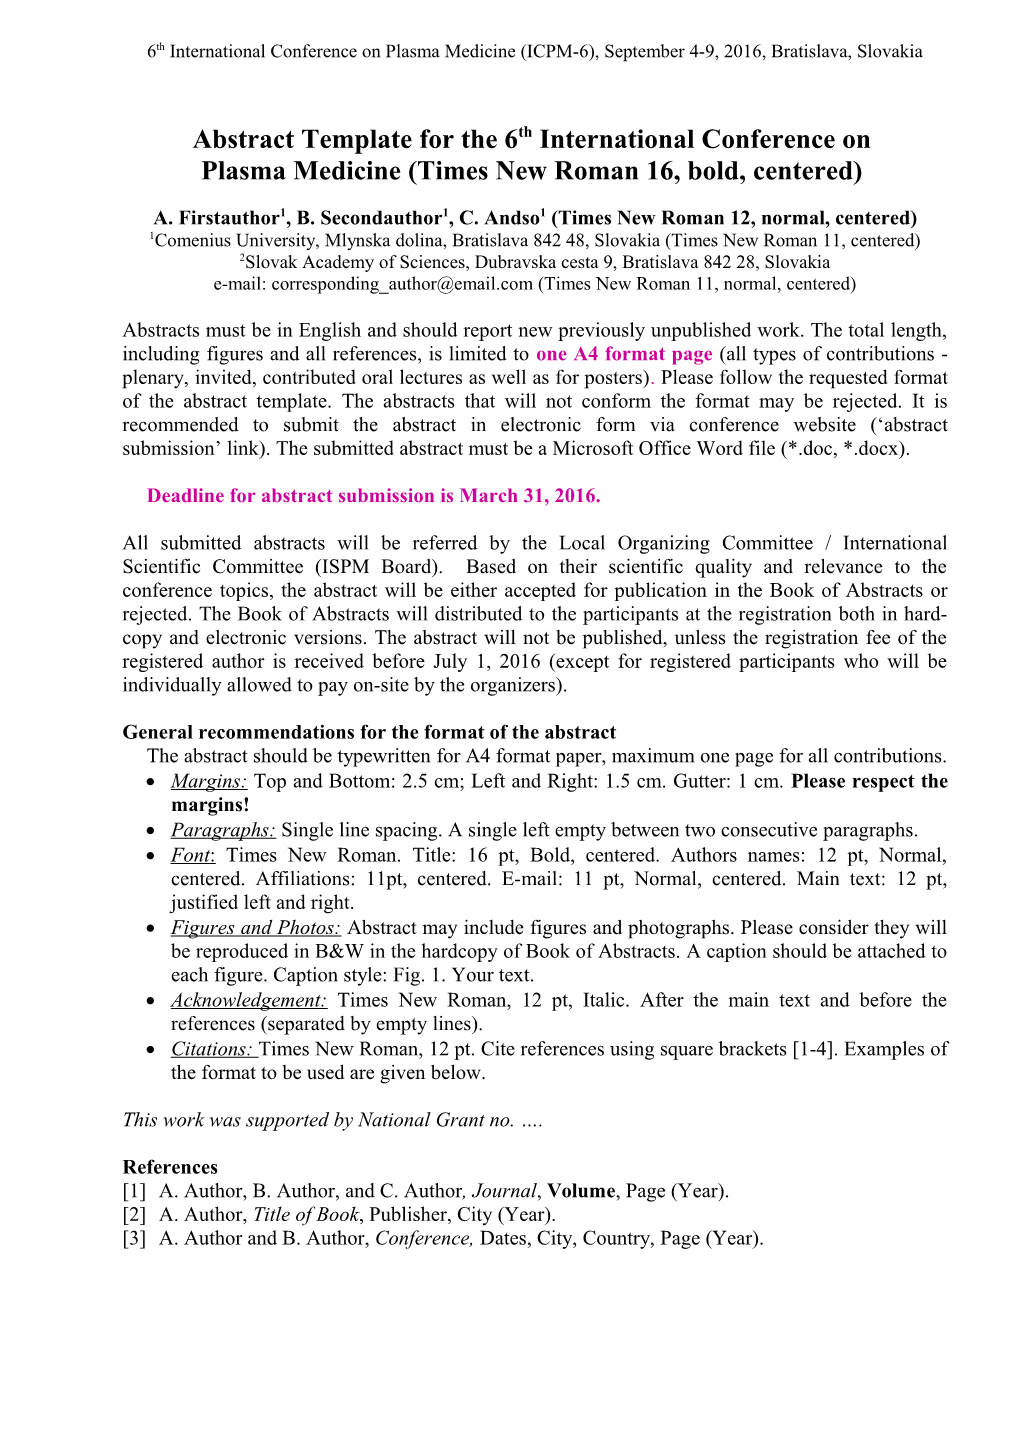 Abstract Template for 6Th International Conference On